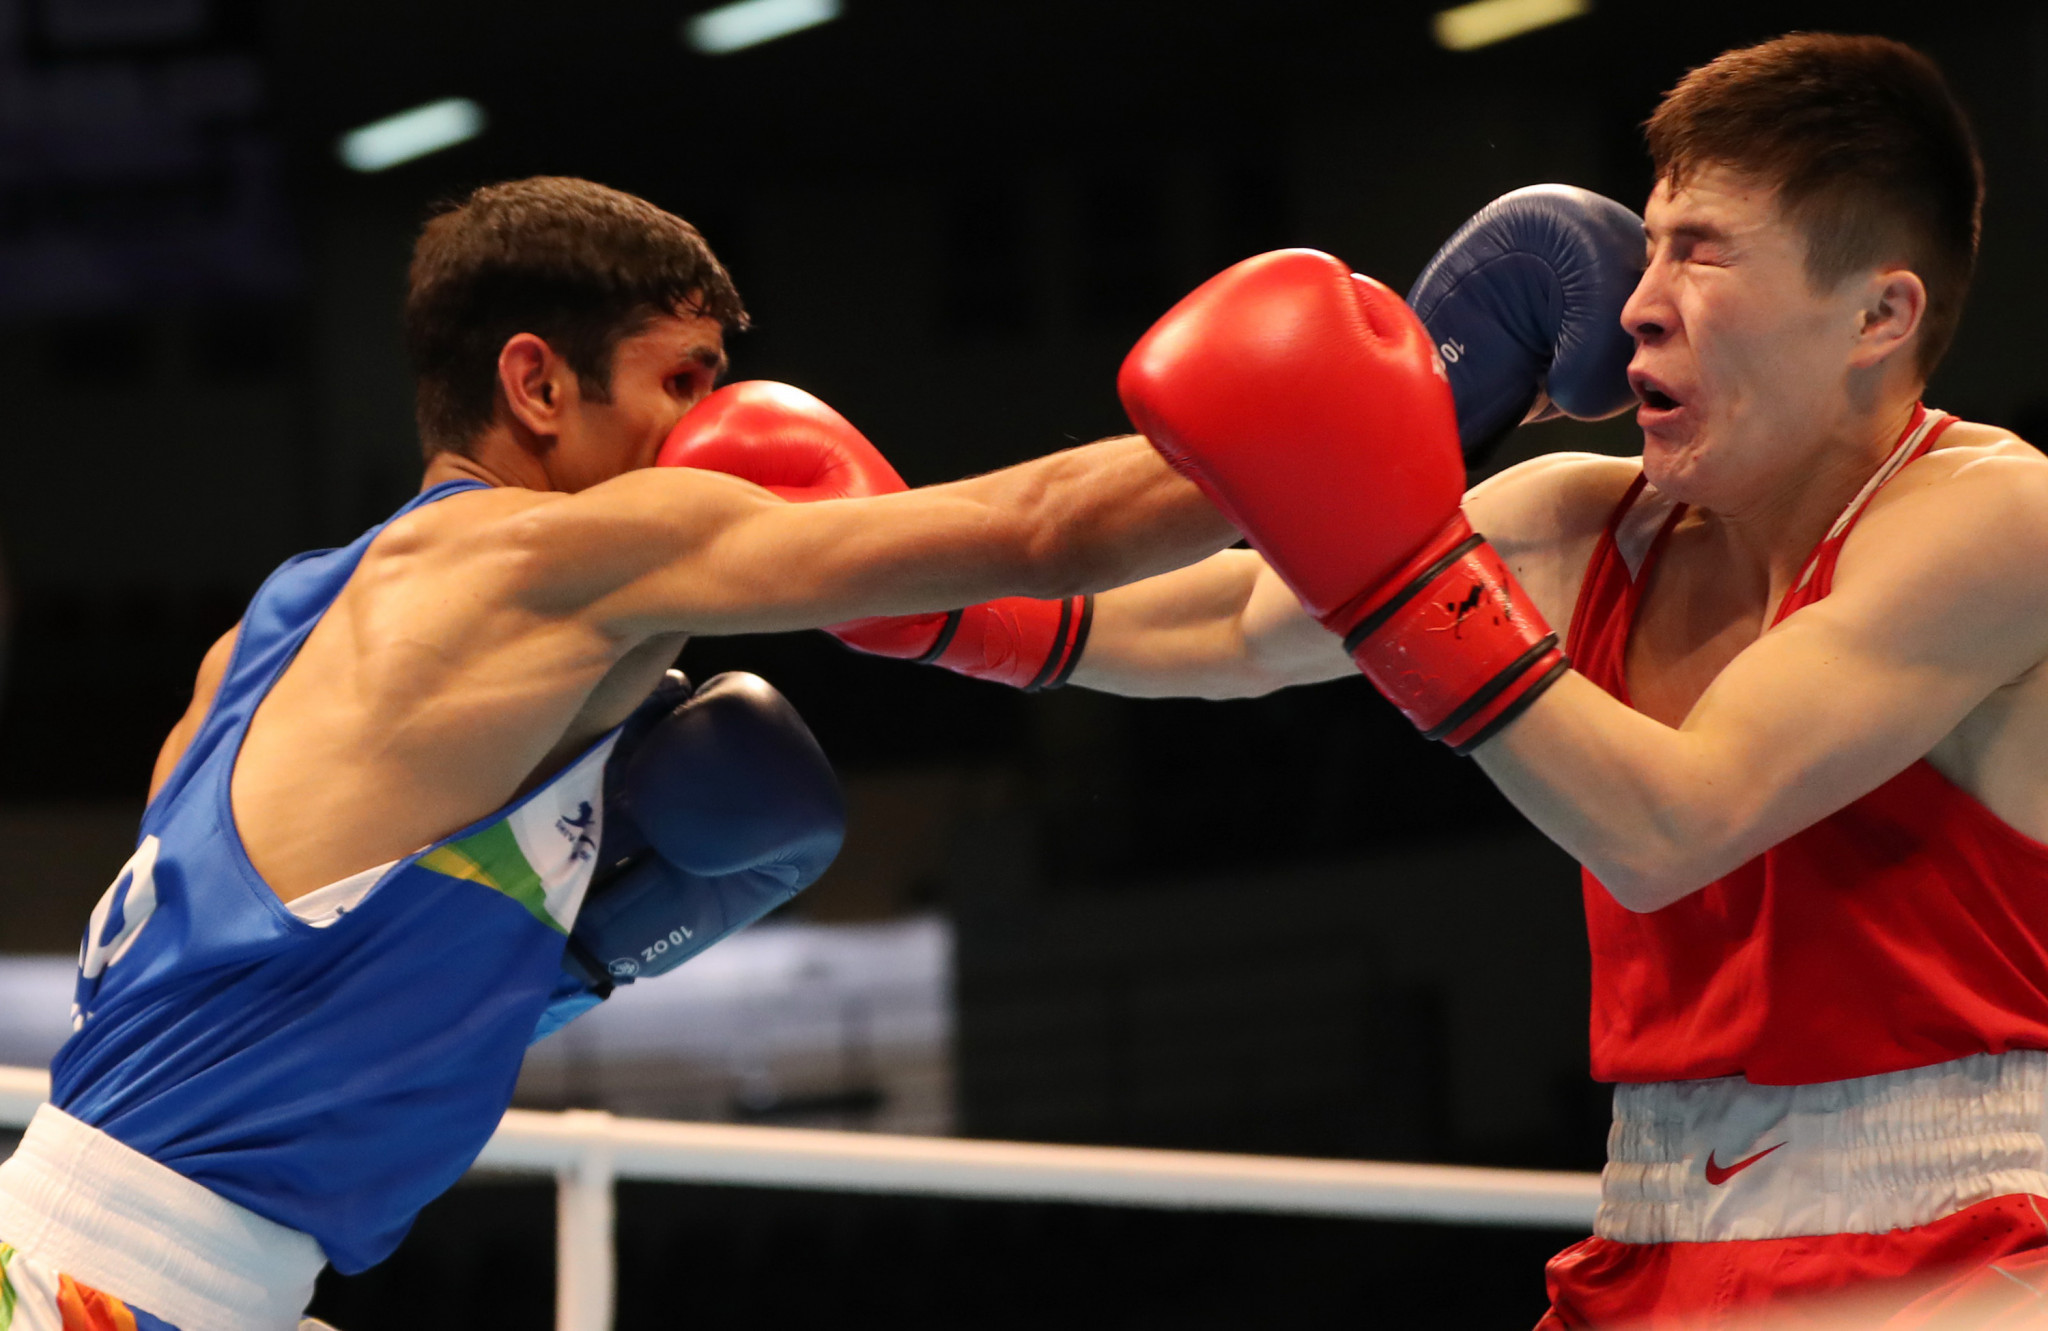 Preliminary bouts were held on day one  ©JOC